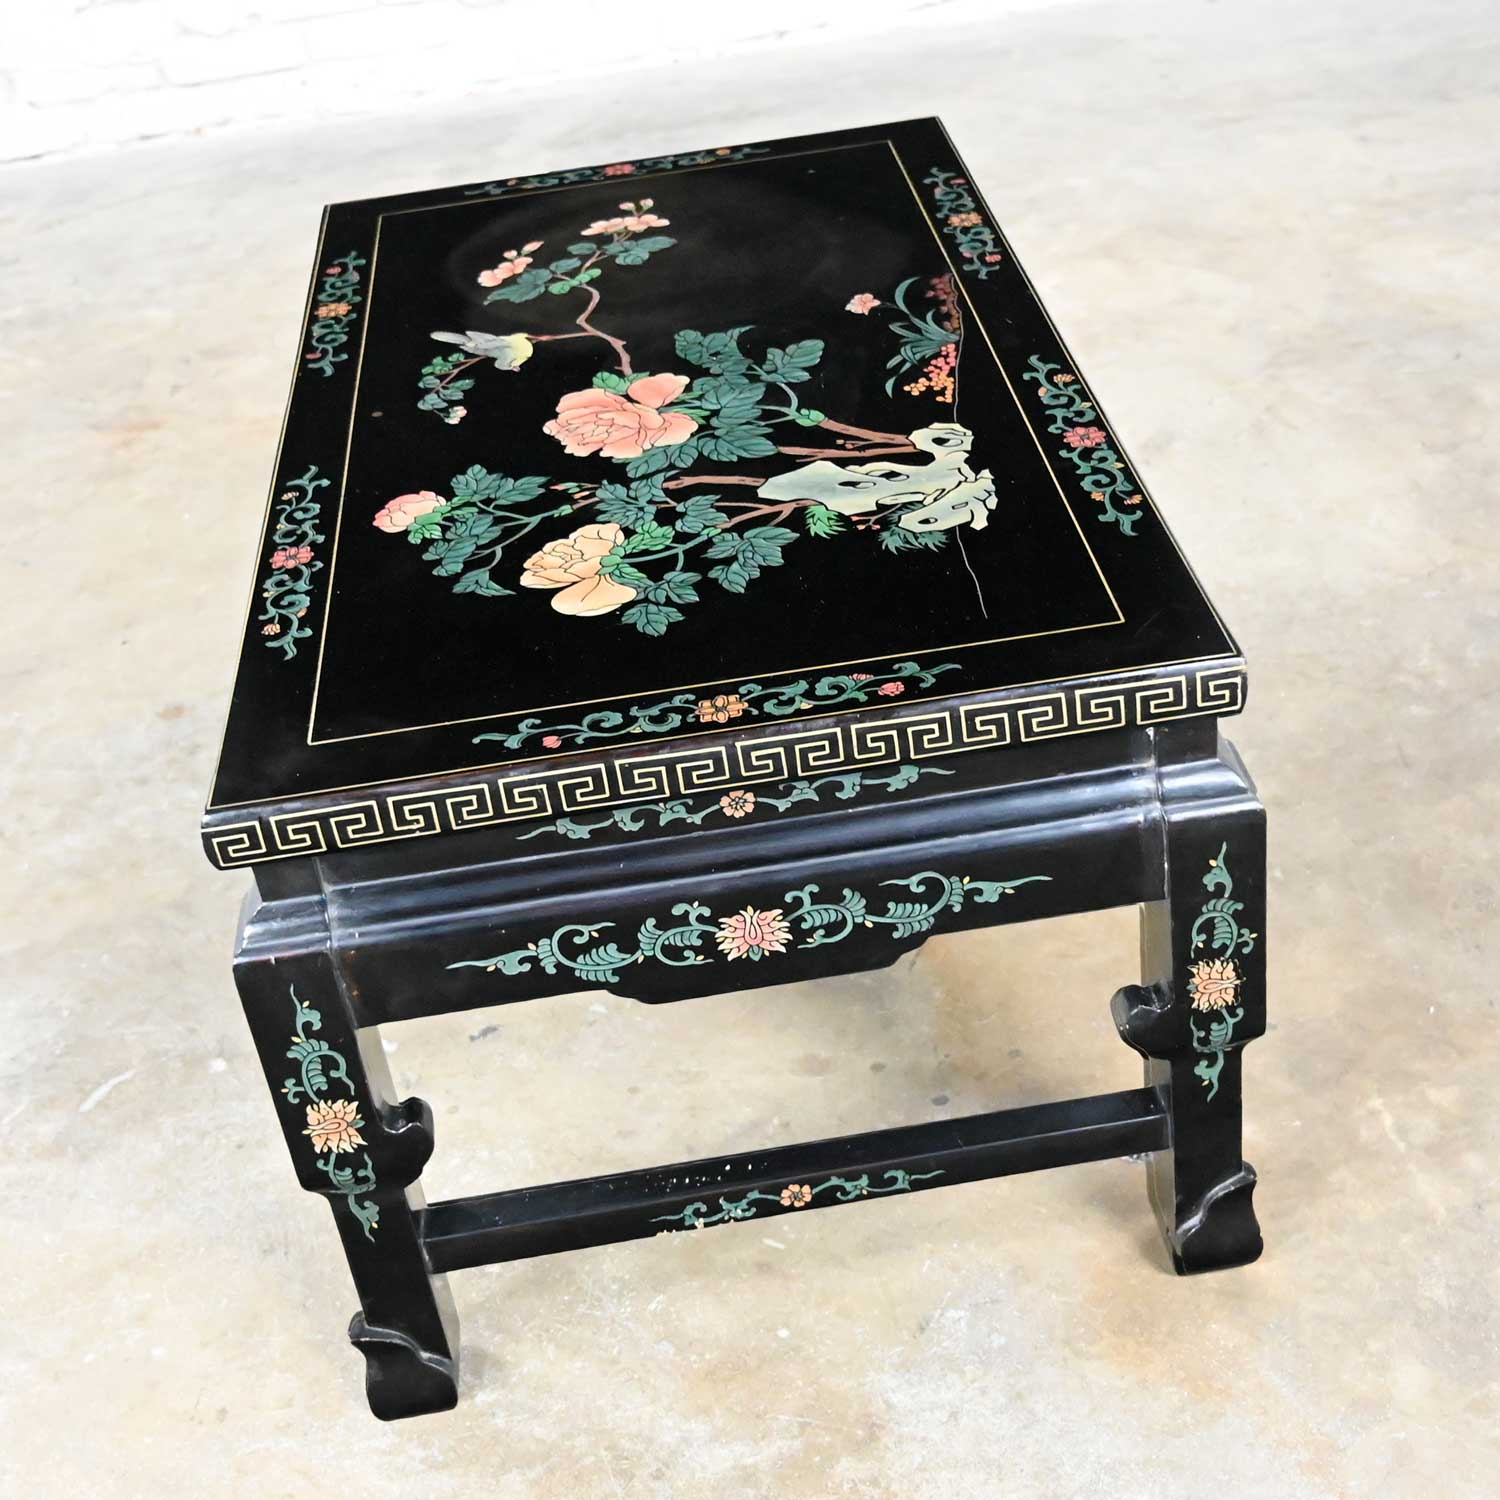 Vintage Chinoiserie Asian Folding Coffee Table Black Lacquered Carved Gold Meander & Floral Design